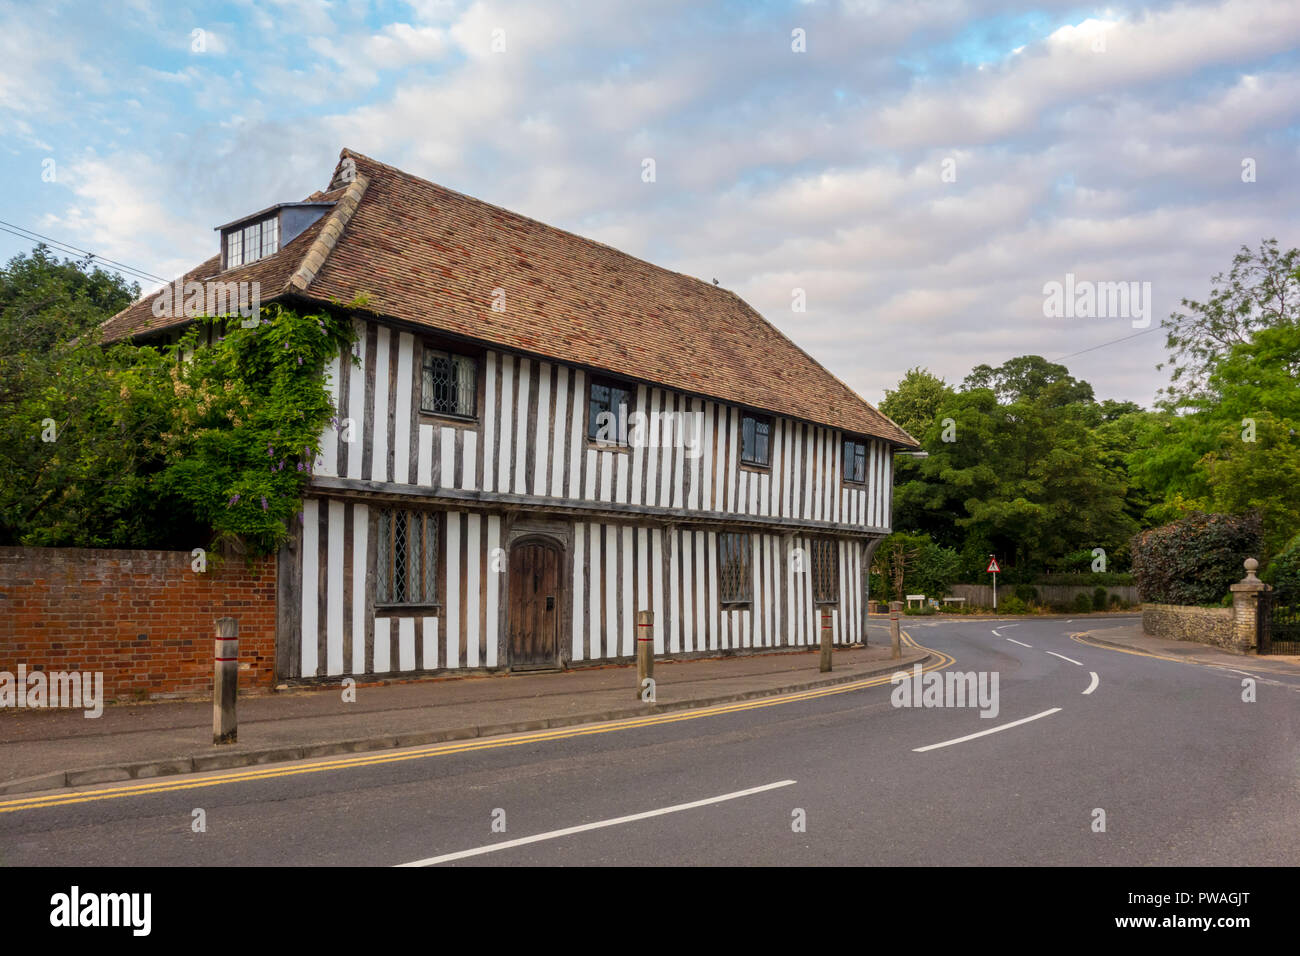 The Guildhall, historic 16th century timber framed building in Whittlesford, Cambridge, South Cambridgeshire, UK Stock Photo